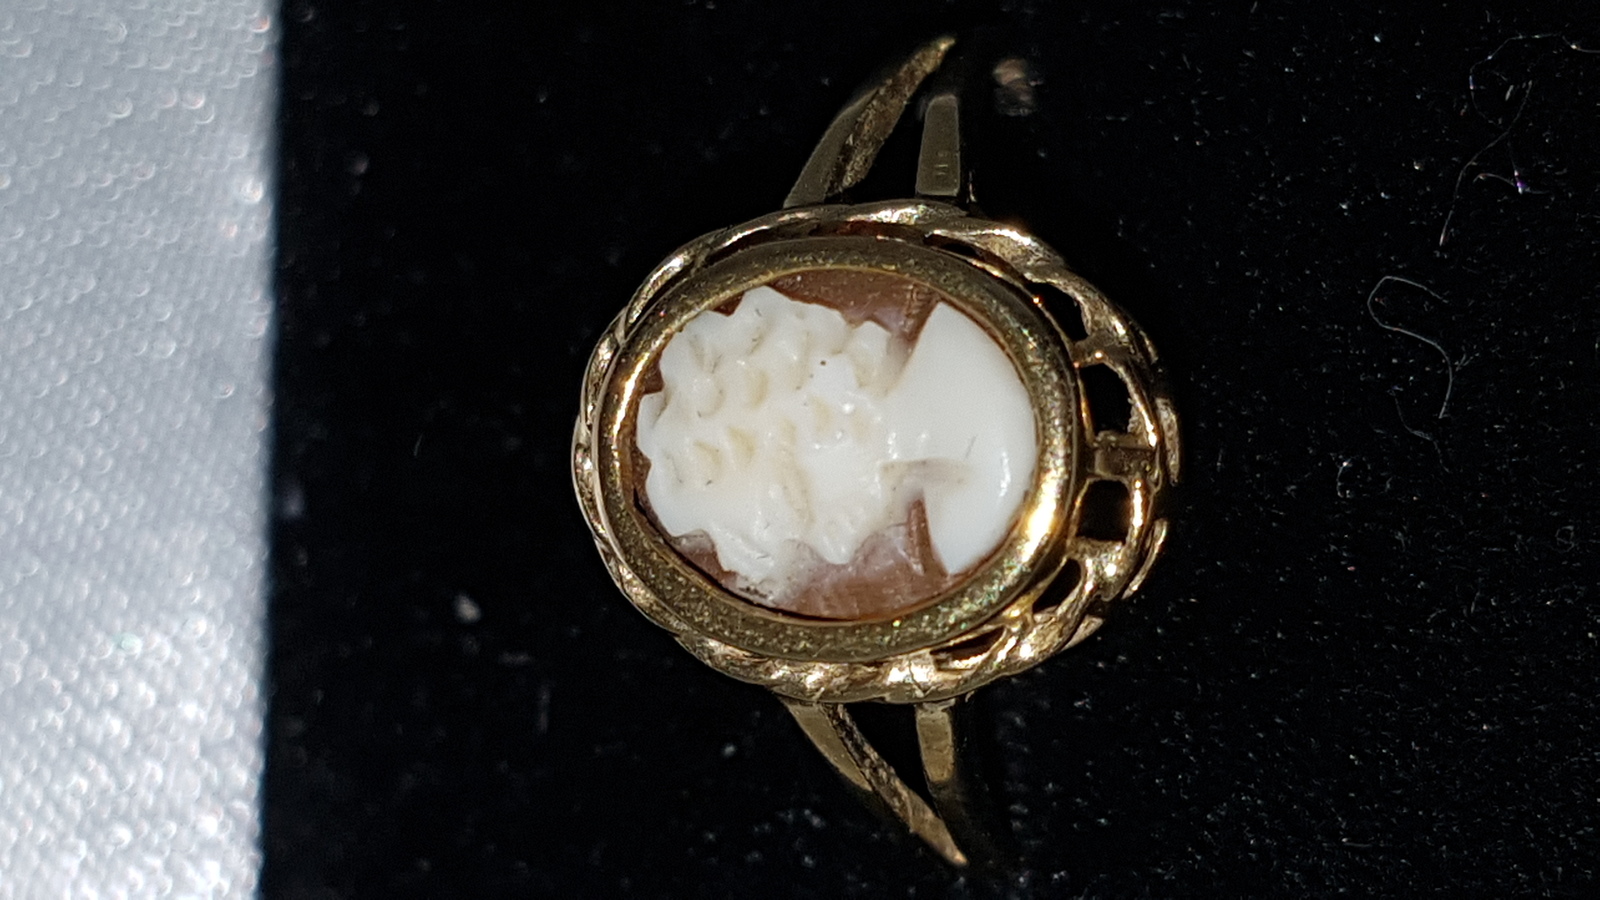 9ct Gold With Cameo Ring